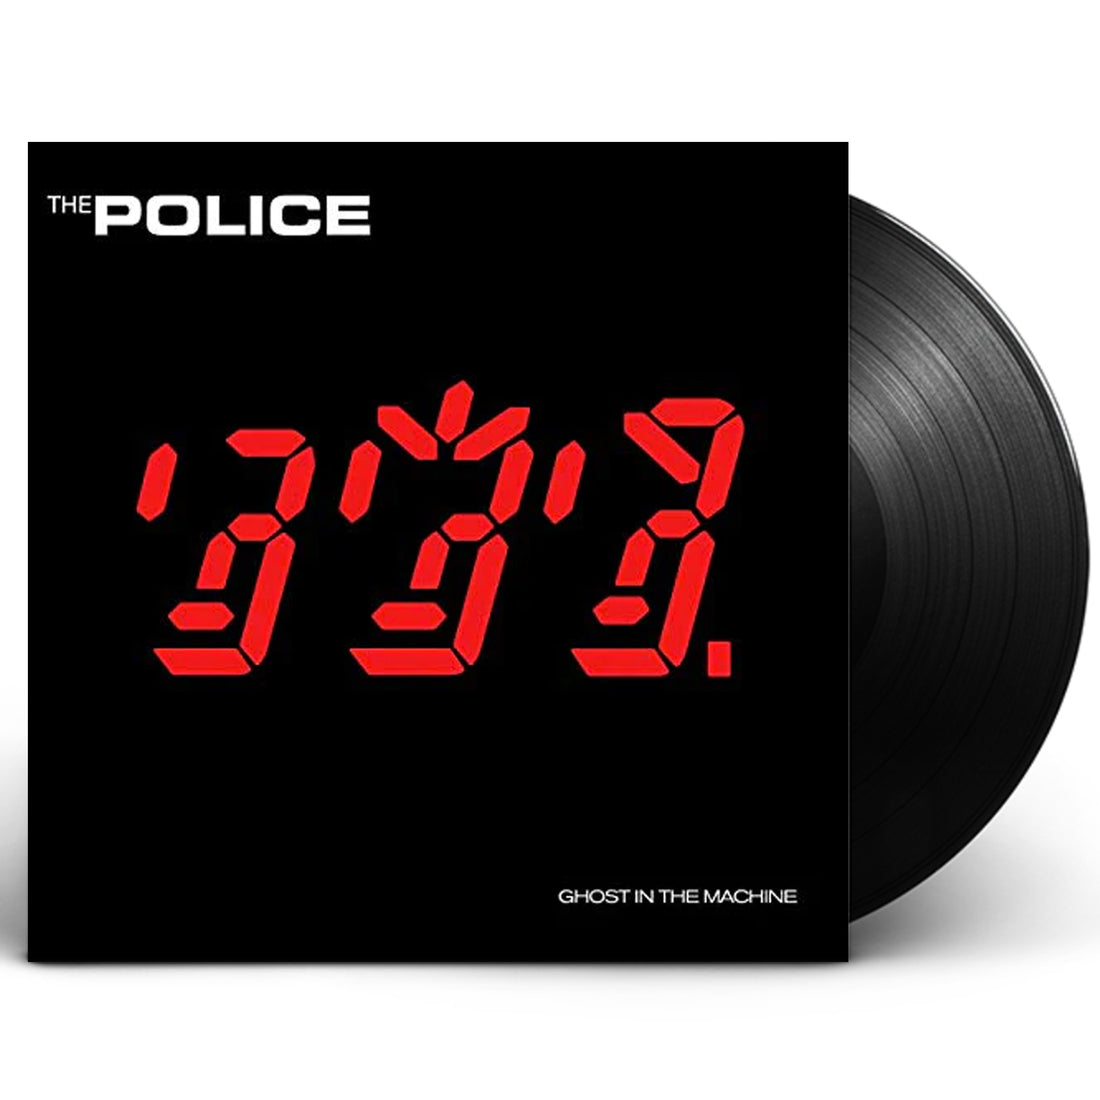 The Police "Ghost in the Machine" LP Vinyl